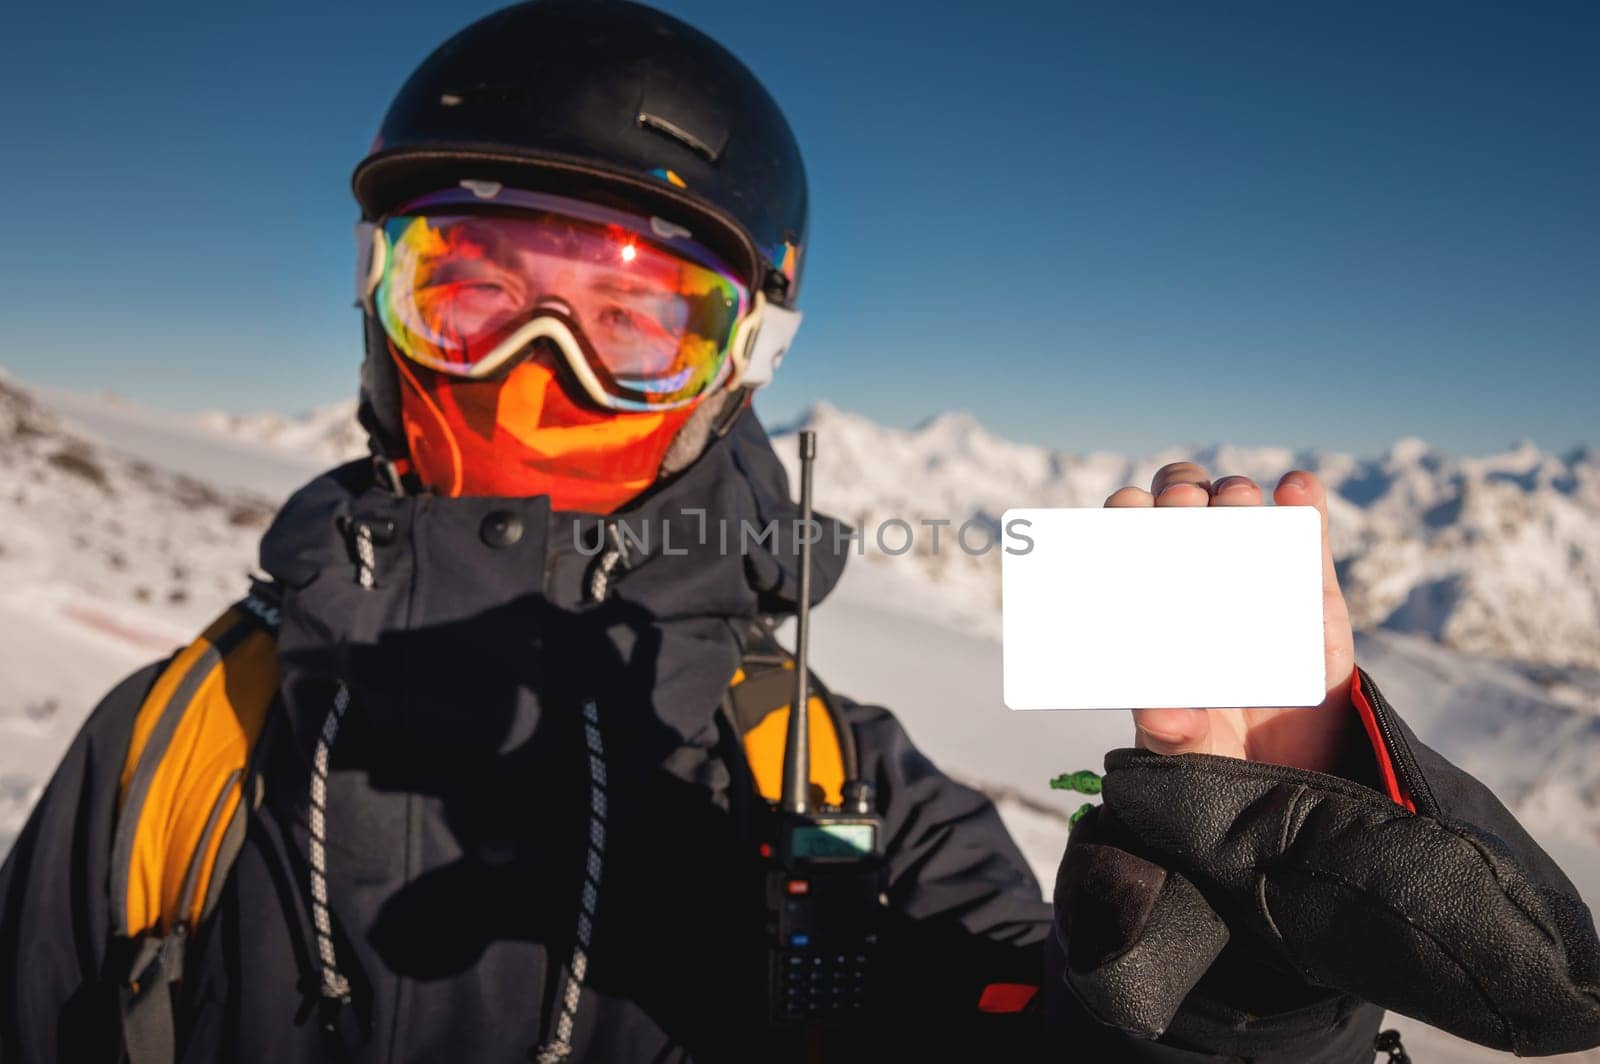 A snowboarder holds an empty lift pass with a mountain in the background. Blank ski pass in the hand of a young skier in winter gear looking at the camera. Concept illustrating ski entry fee.